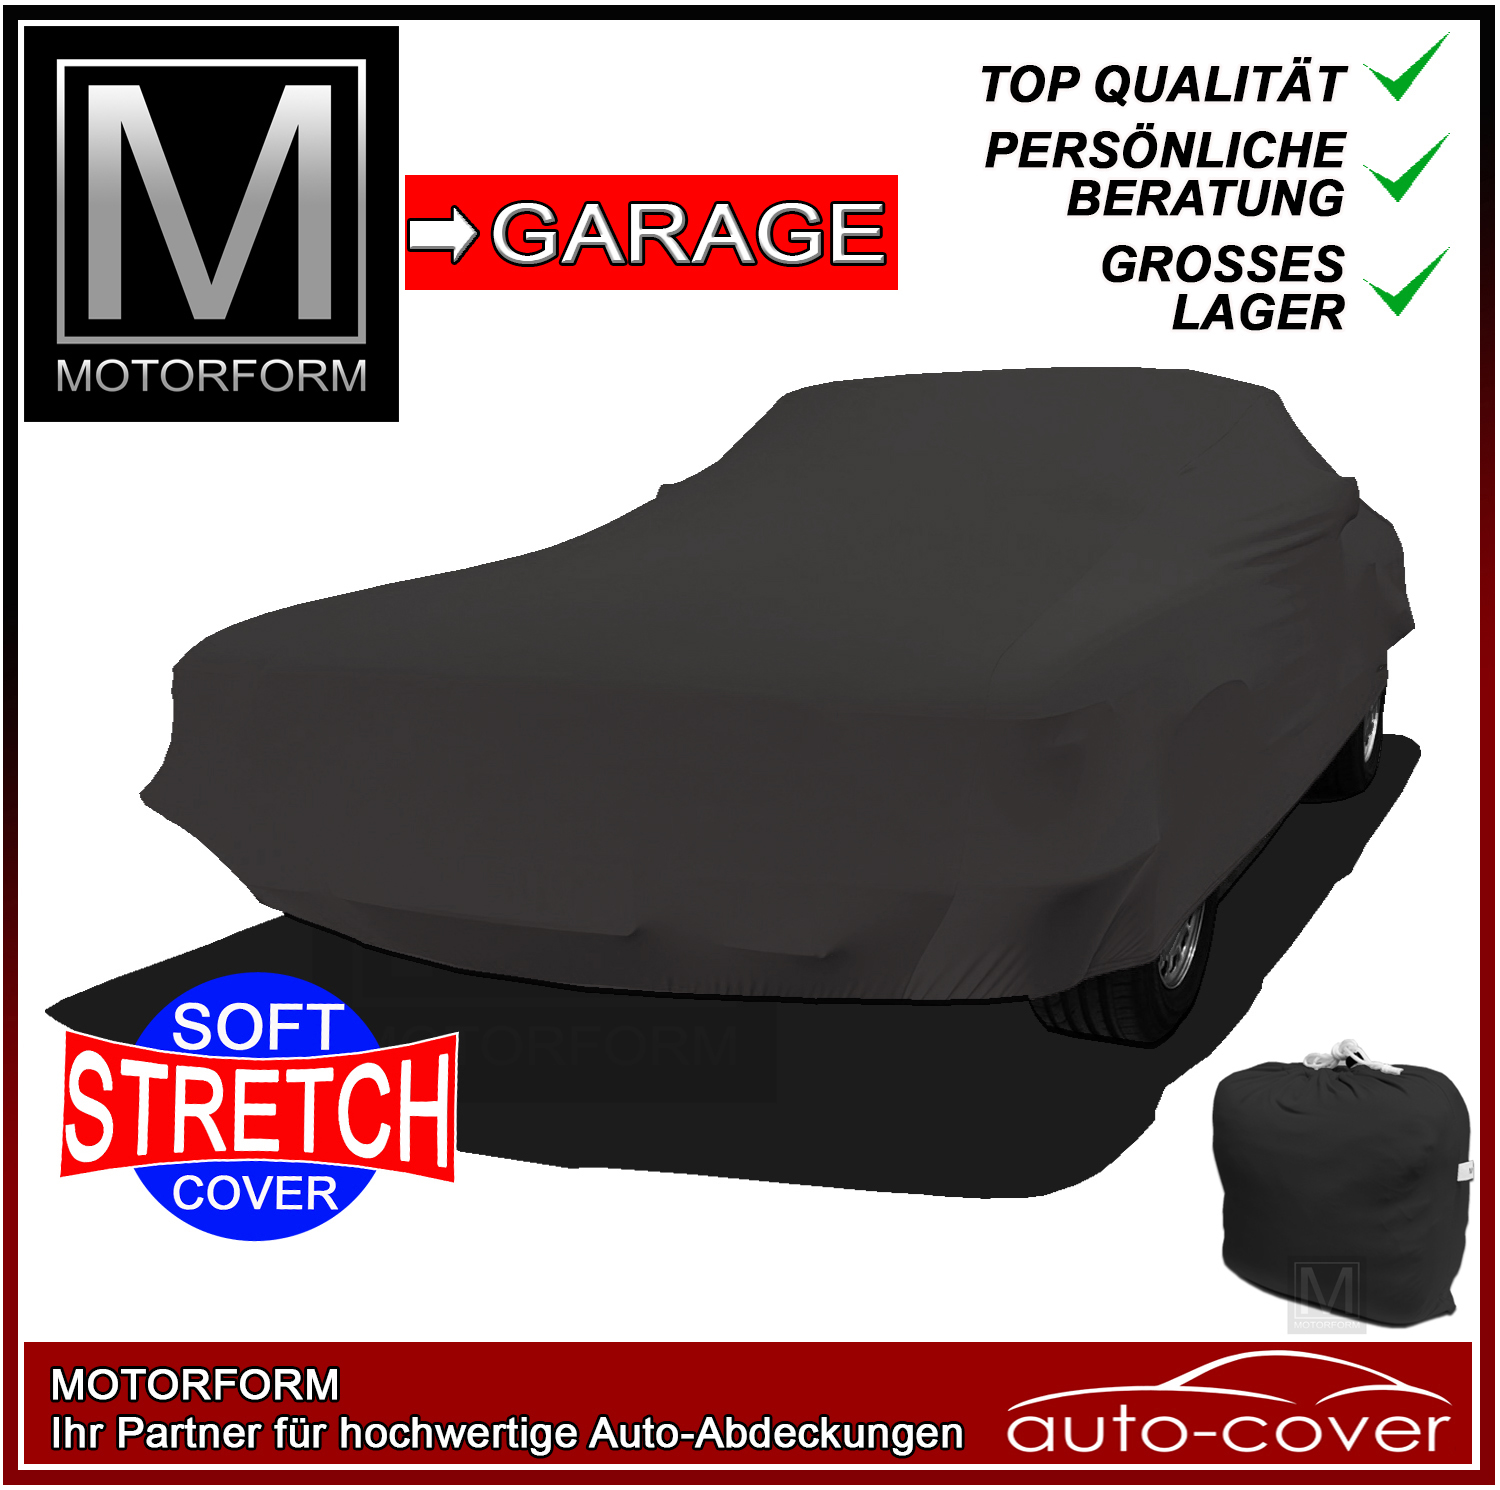 Super Stretchy Cover for Peugeot 404 Convertible